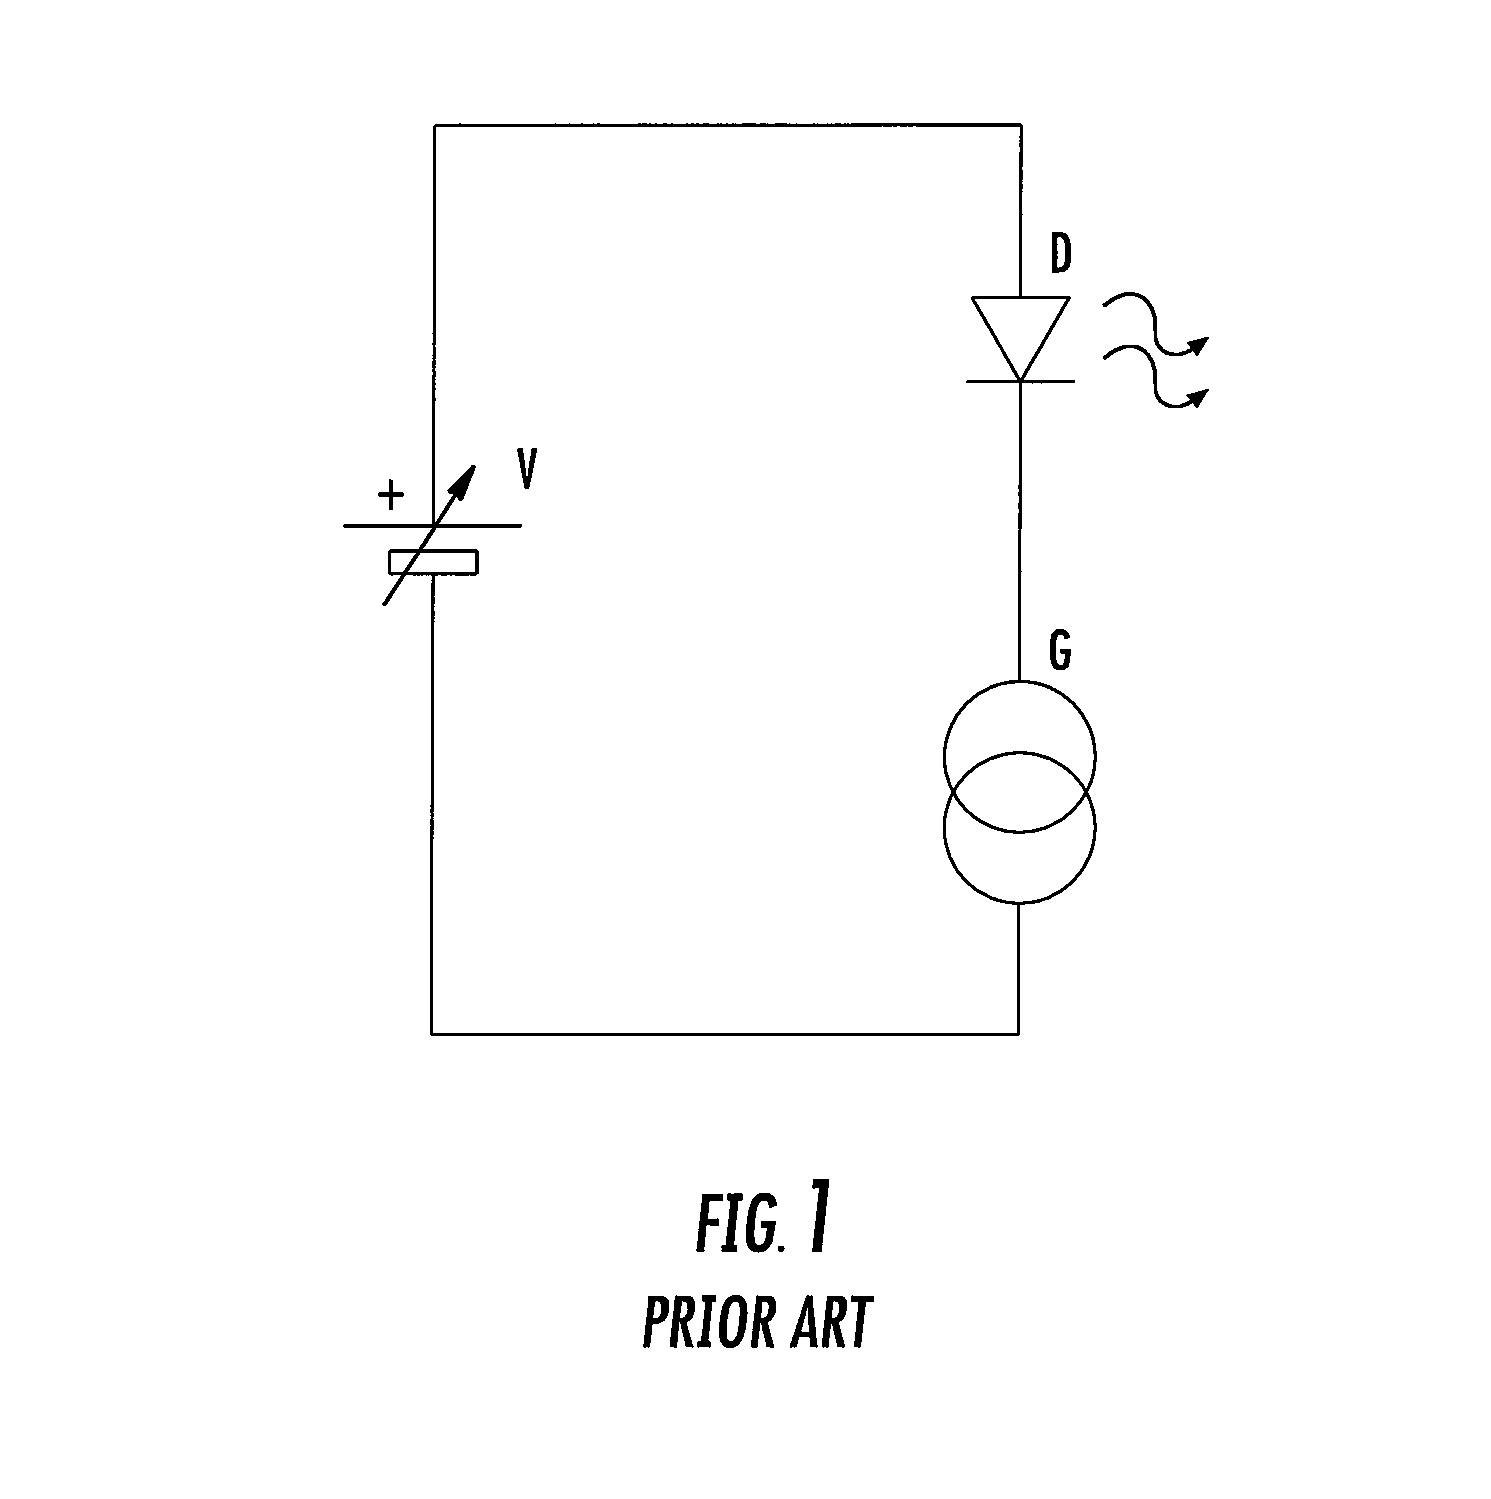 LED Switch Circuitry for Varying Input Voltage Source